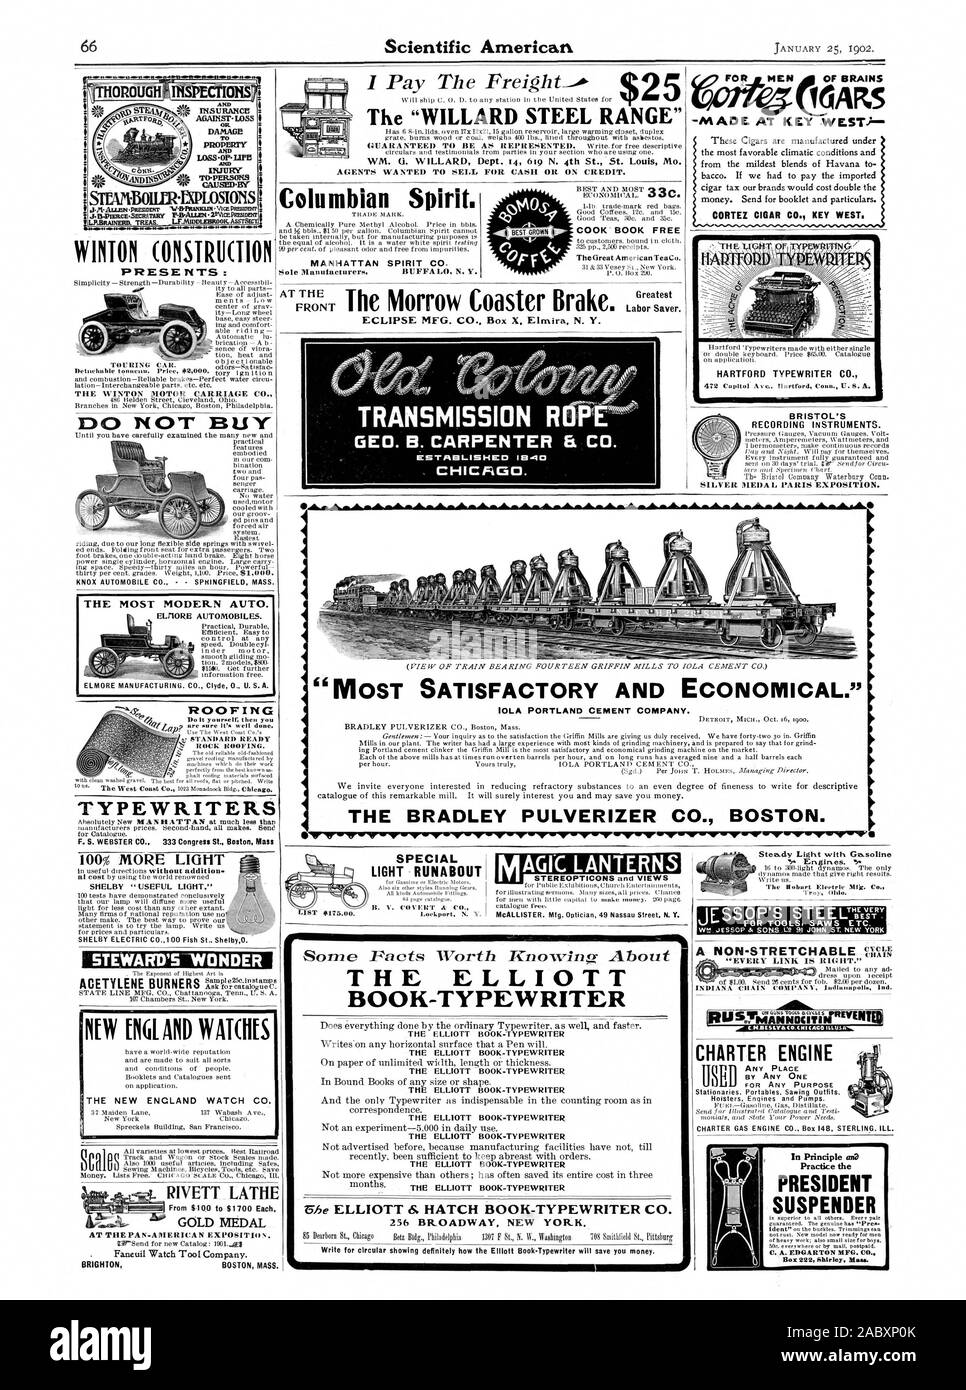 BUFFAL N. Y. COOK' BOOK FREE TRANSMISSION RIPE' GED. B. CARPENTER EL CO. ESTABLISHED 340 . CHICAGO. 'MOST SATISFACTORY AND ECONOMICAL.' THE MOST MODERN AUTO. ELORG AUTOMOBILES. q; STANDARD READY ROCK ROOFING. ipmfieierto'Yogrmthaetebrei'als'::fled TYPEWRITERS 100% MORE LIGHT SHELBY 'USEFUL LIGHT.' STEWARD'S 1NONDER IOLA PORTLAND CEMENT COMPANY. NM MI AND WATMS THE NEW ENCLAND WATCH CO. ACETYLENE BURNERS RIVETT LATHE From $100 to $1700 Each. GOLD MEDAL Faneuil Watch Tool Company. SPECIAL Lockport Si. Y. MAGIC LANTERNS THE ELLIOTT BOOK-TYPEWRITER Does everything done by the ordinary Typewriter Stock Photo